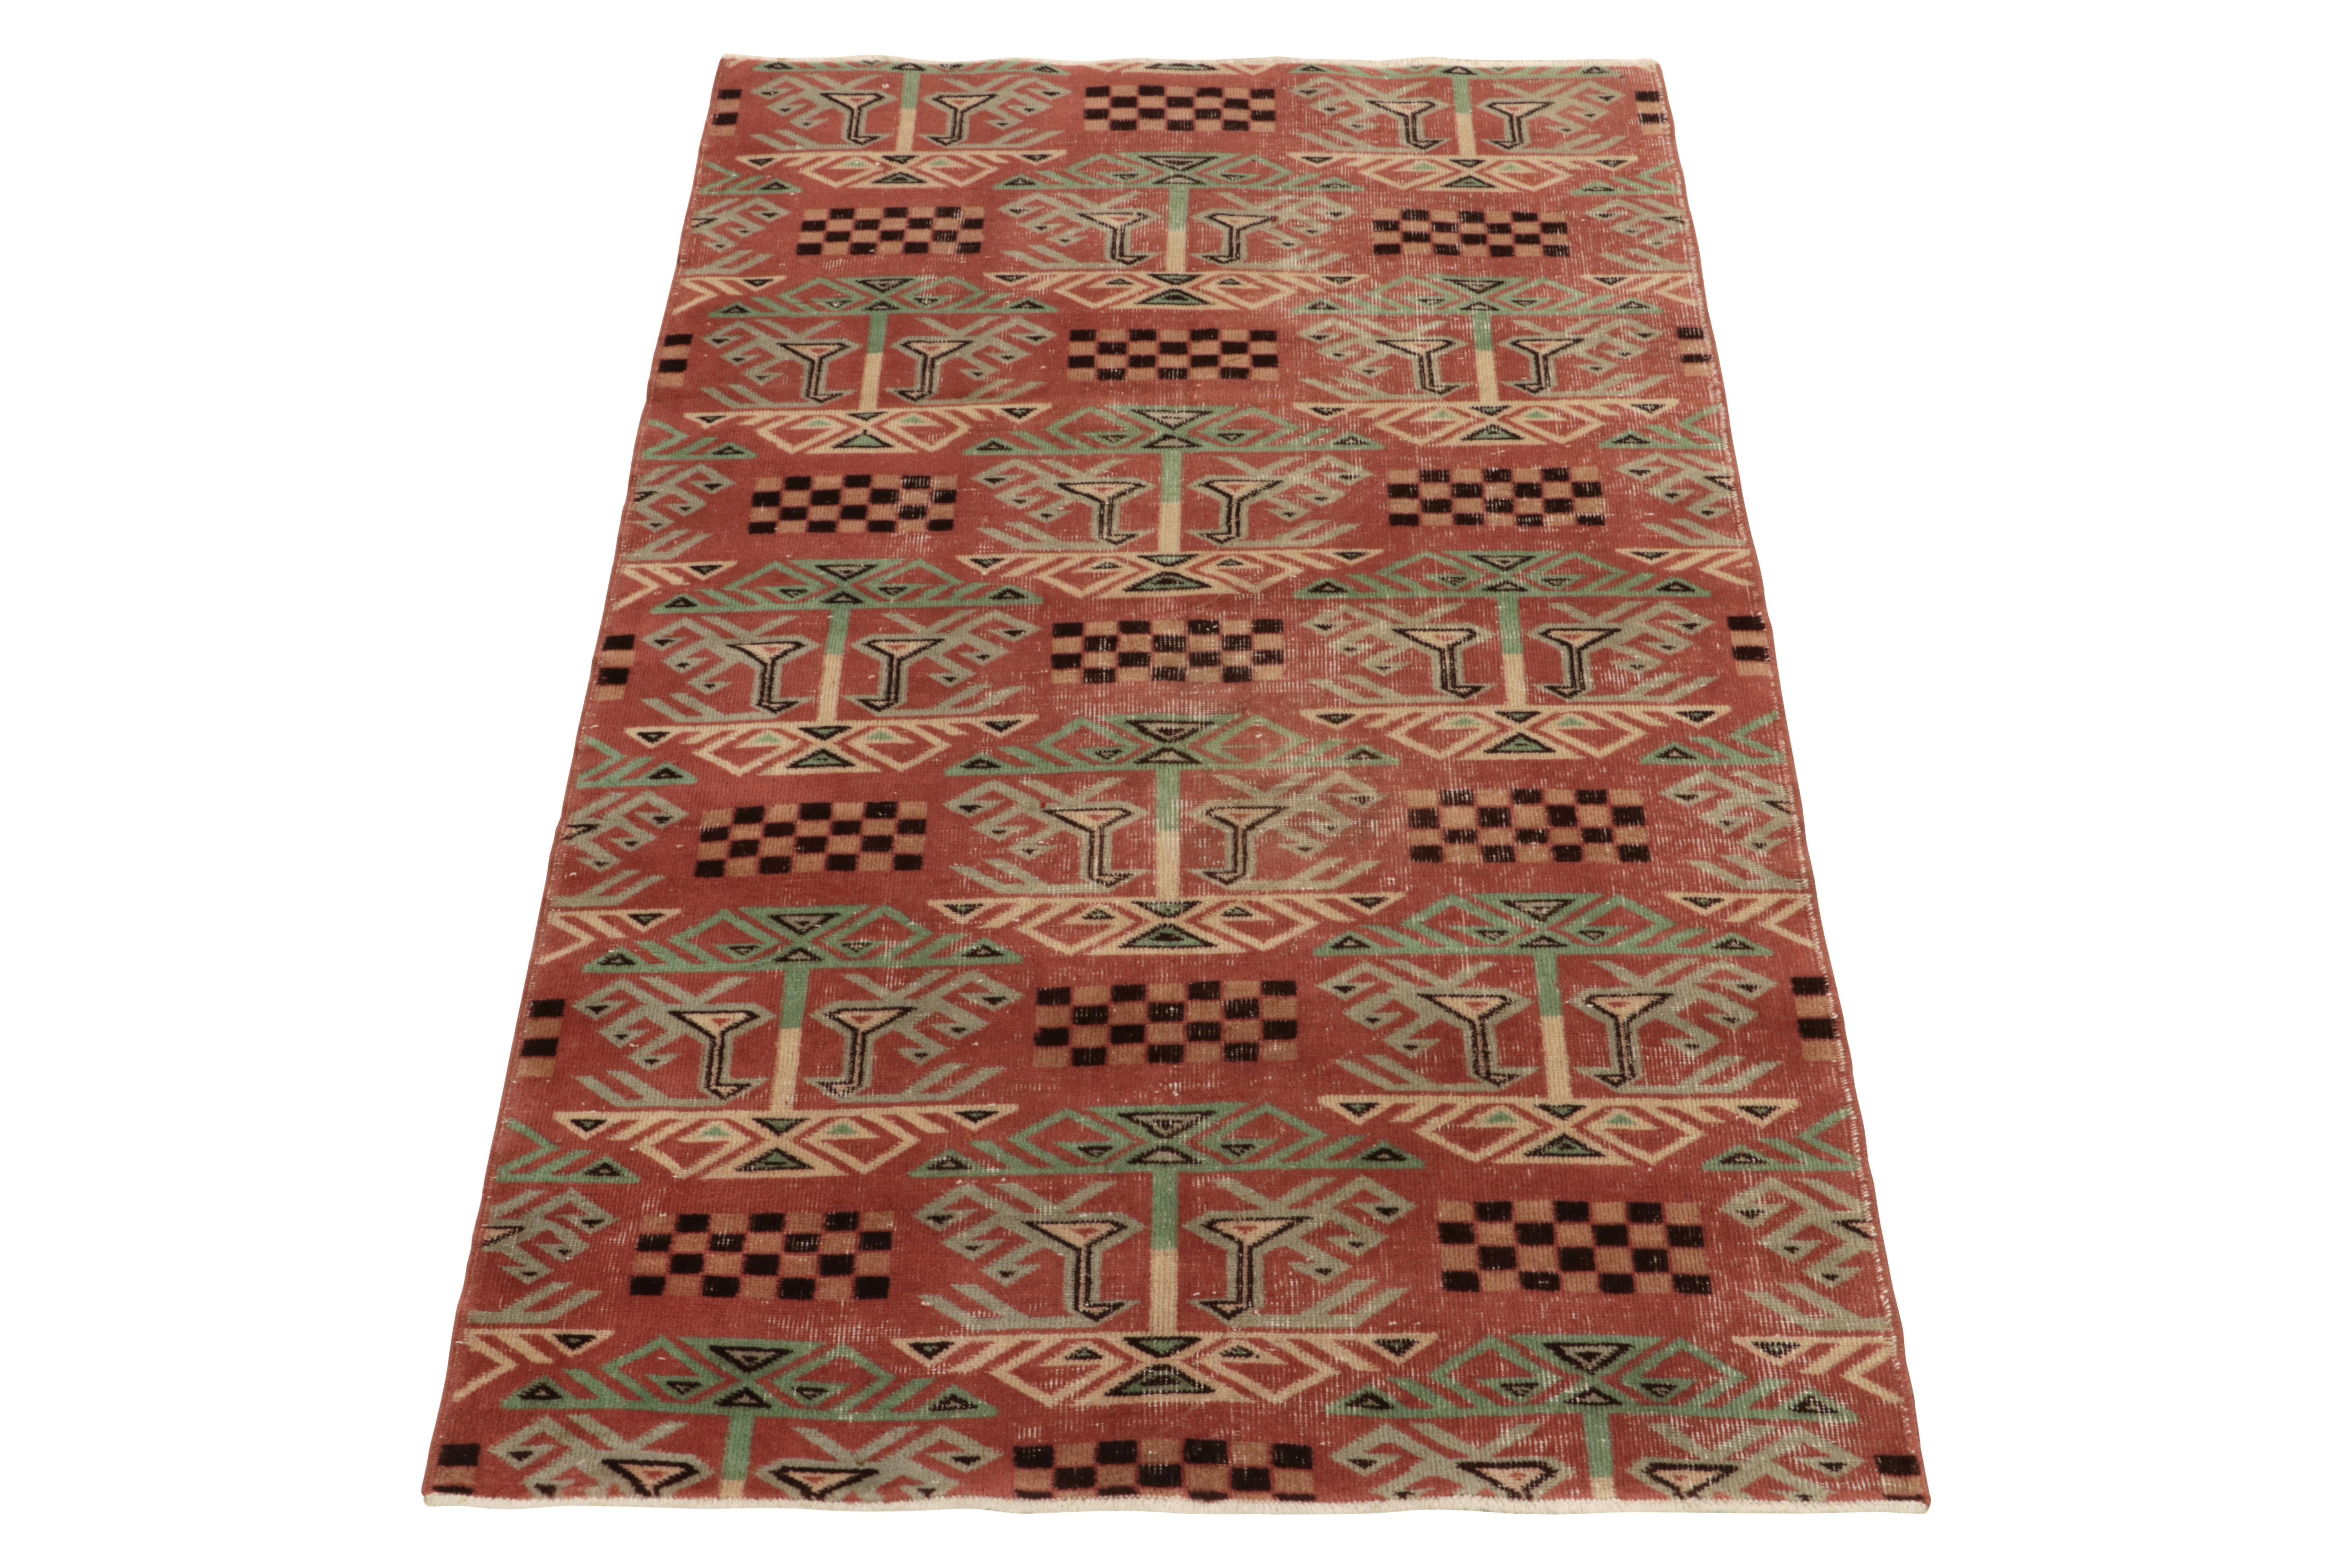 Hand-knotted in wool from Turkey circa 1960-1970, a vintage 4x6 distressed rug from bold Turkish atelier. Joining the discerning curtains from Rug & Kilim’s commemorative Mid-Century Pasha Collection. 

The graphic piece showcases an interesting